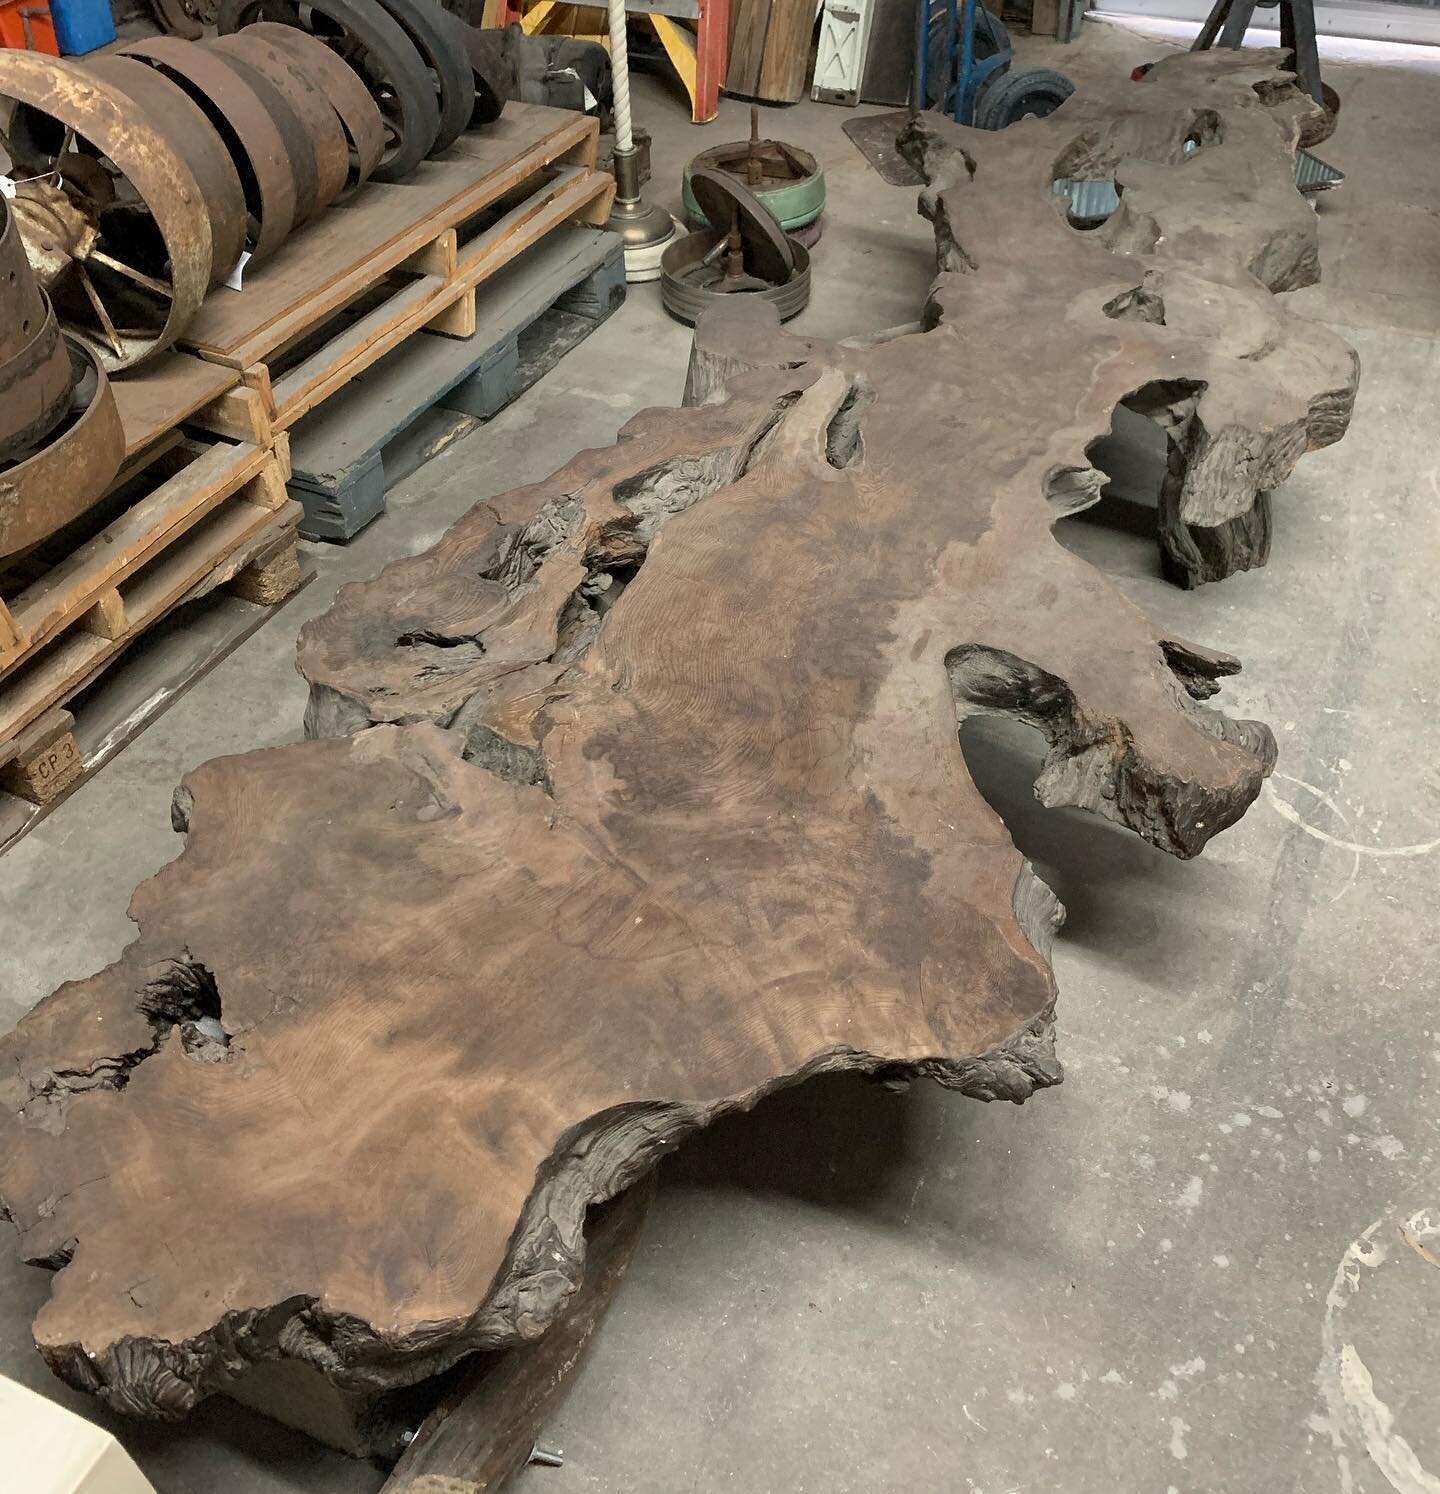 This big boy is perfect for a giant sofa or sectional  127&rdquo;x43&rdquo;  2800.00.  He needs a little oil but he&rsquo;s a beauty. #salvage #interiors #design #reclaimedwood